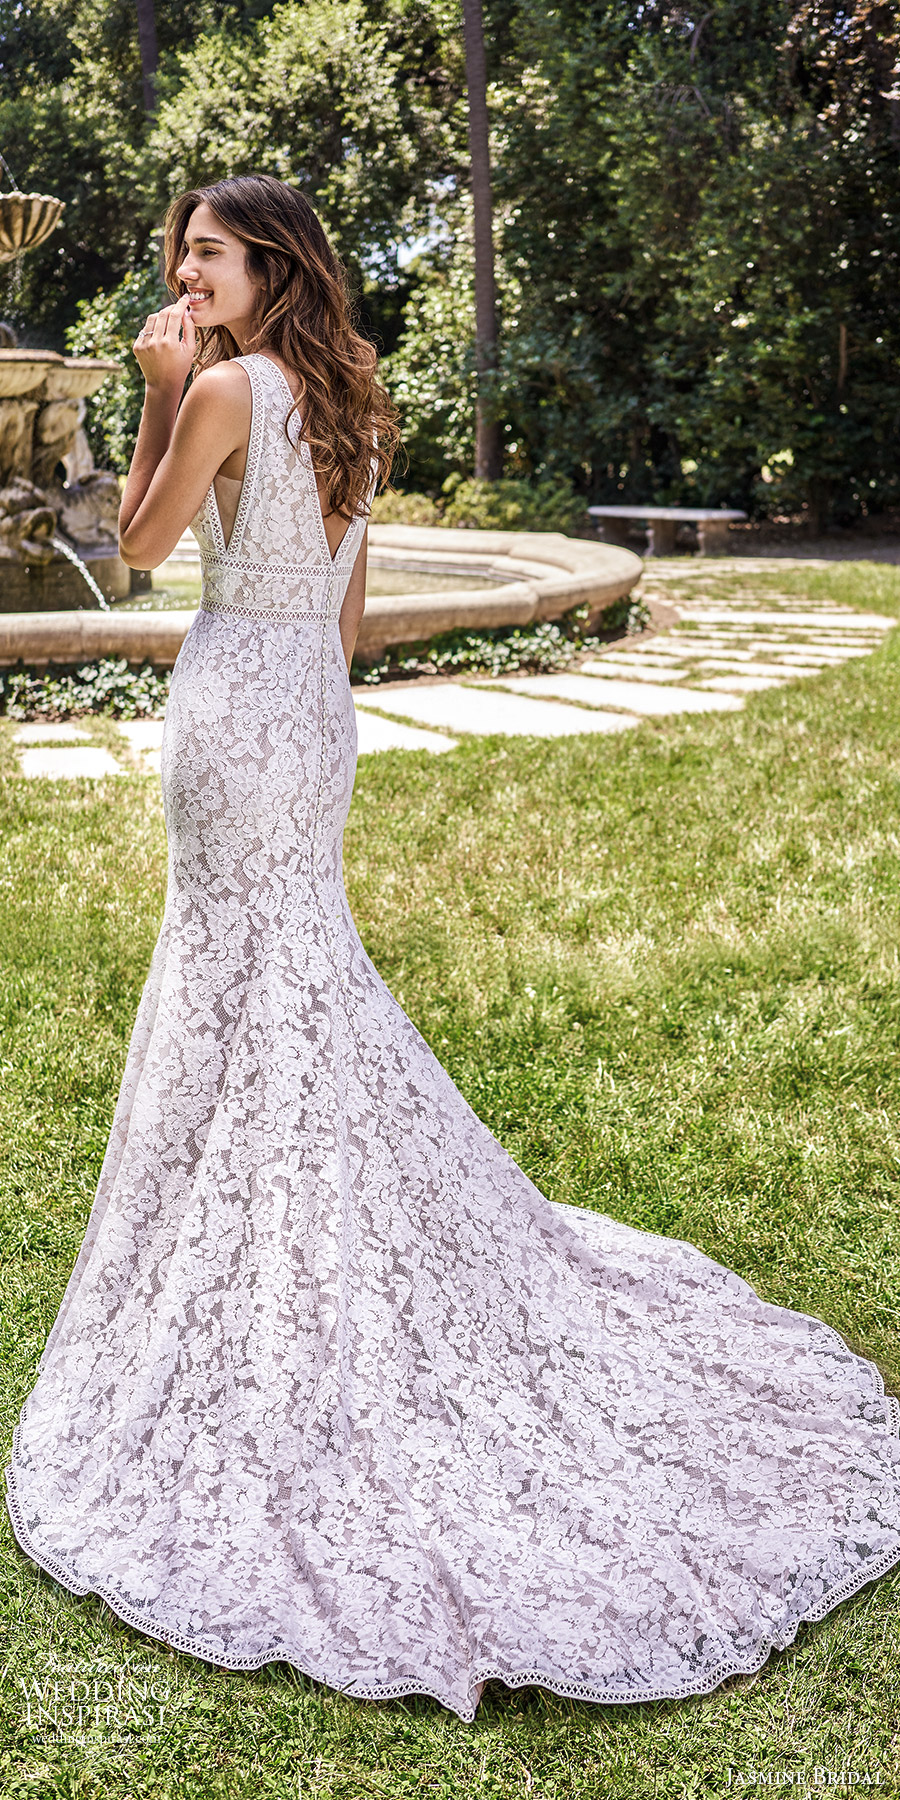 jasmine spring 2020 collection sleeveless thick straps plunging v neckline fully embellished lace fit flare mermaid wedding dress chapel train (3) bv